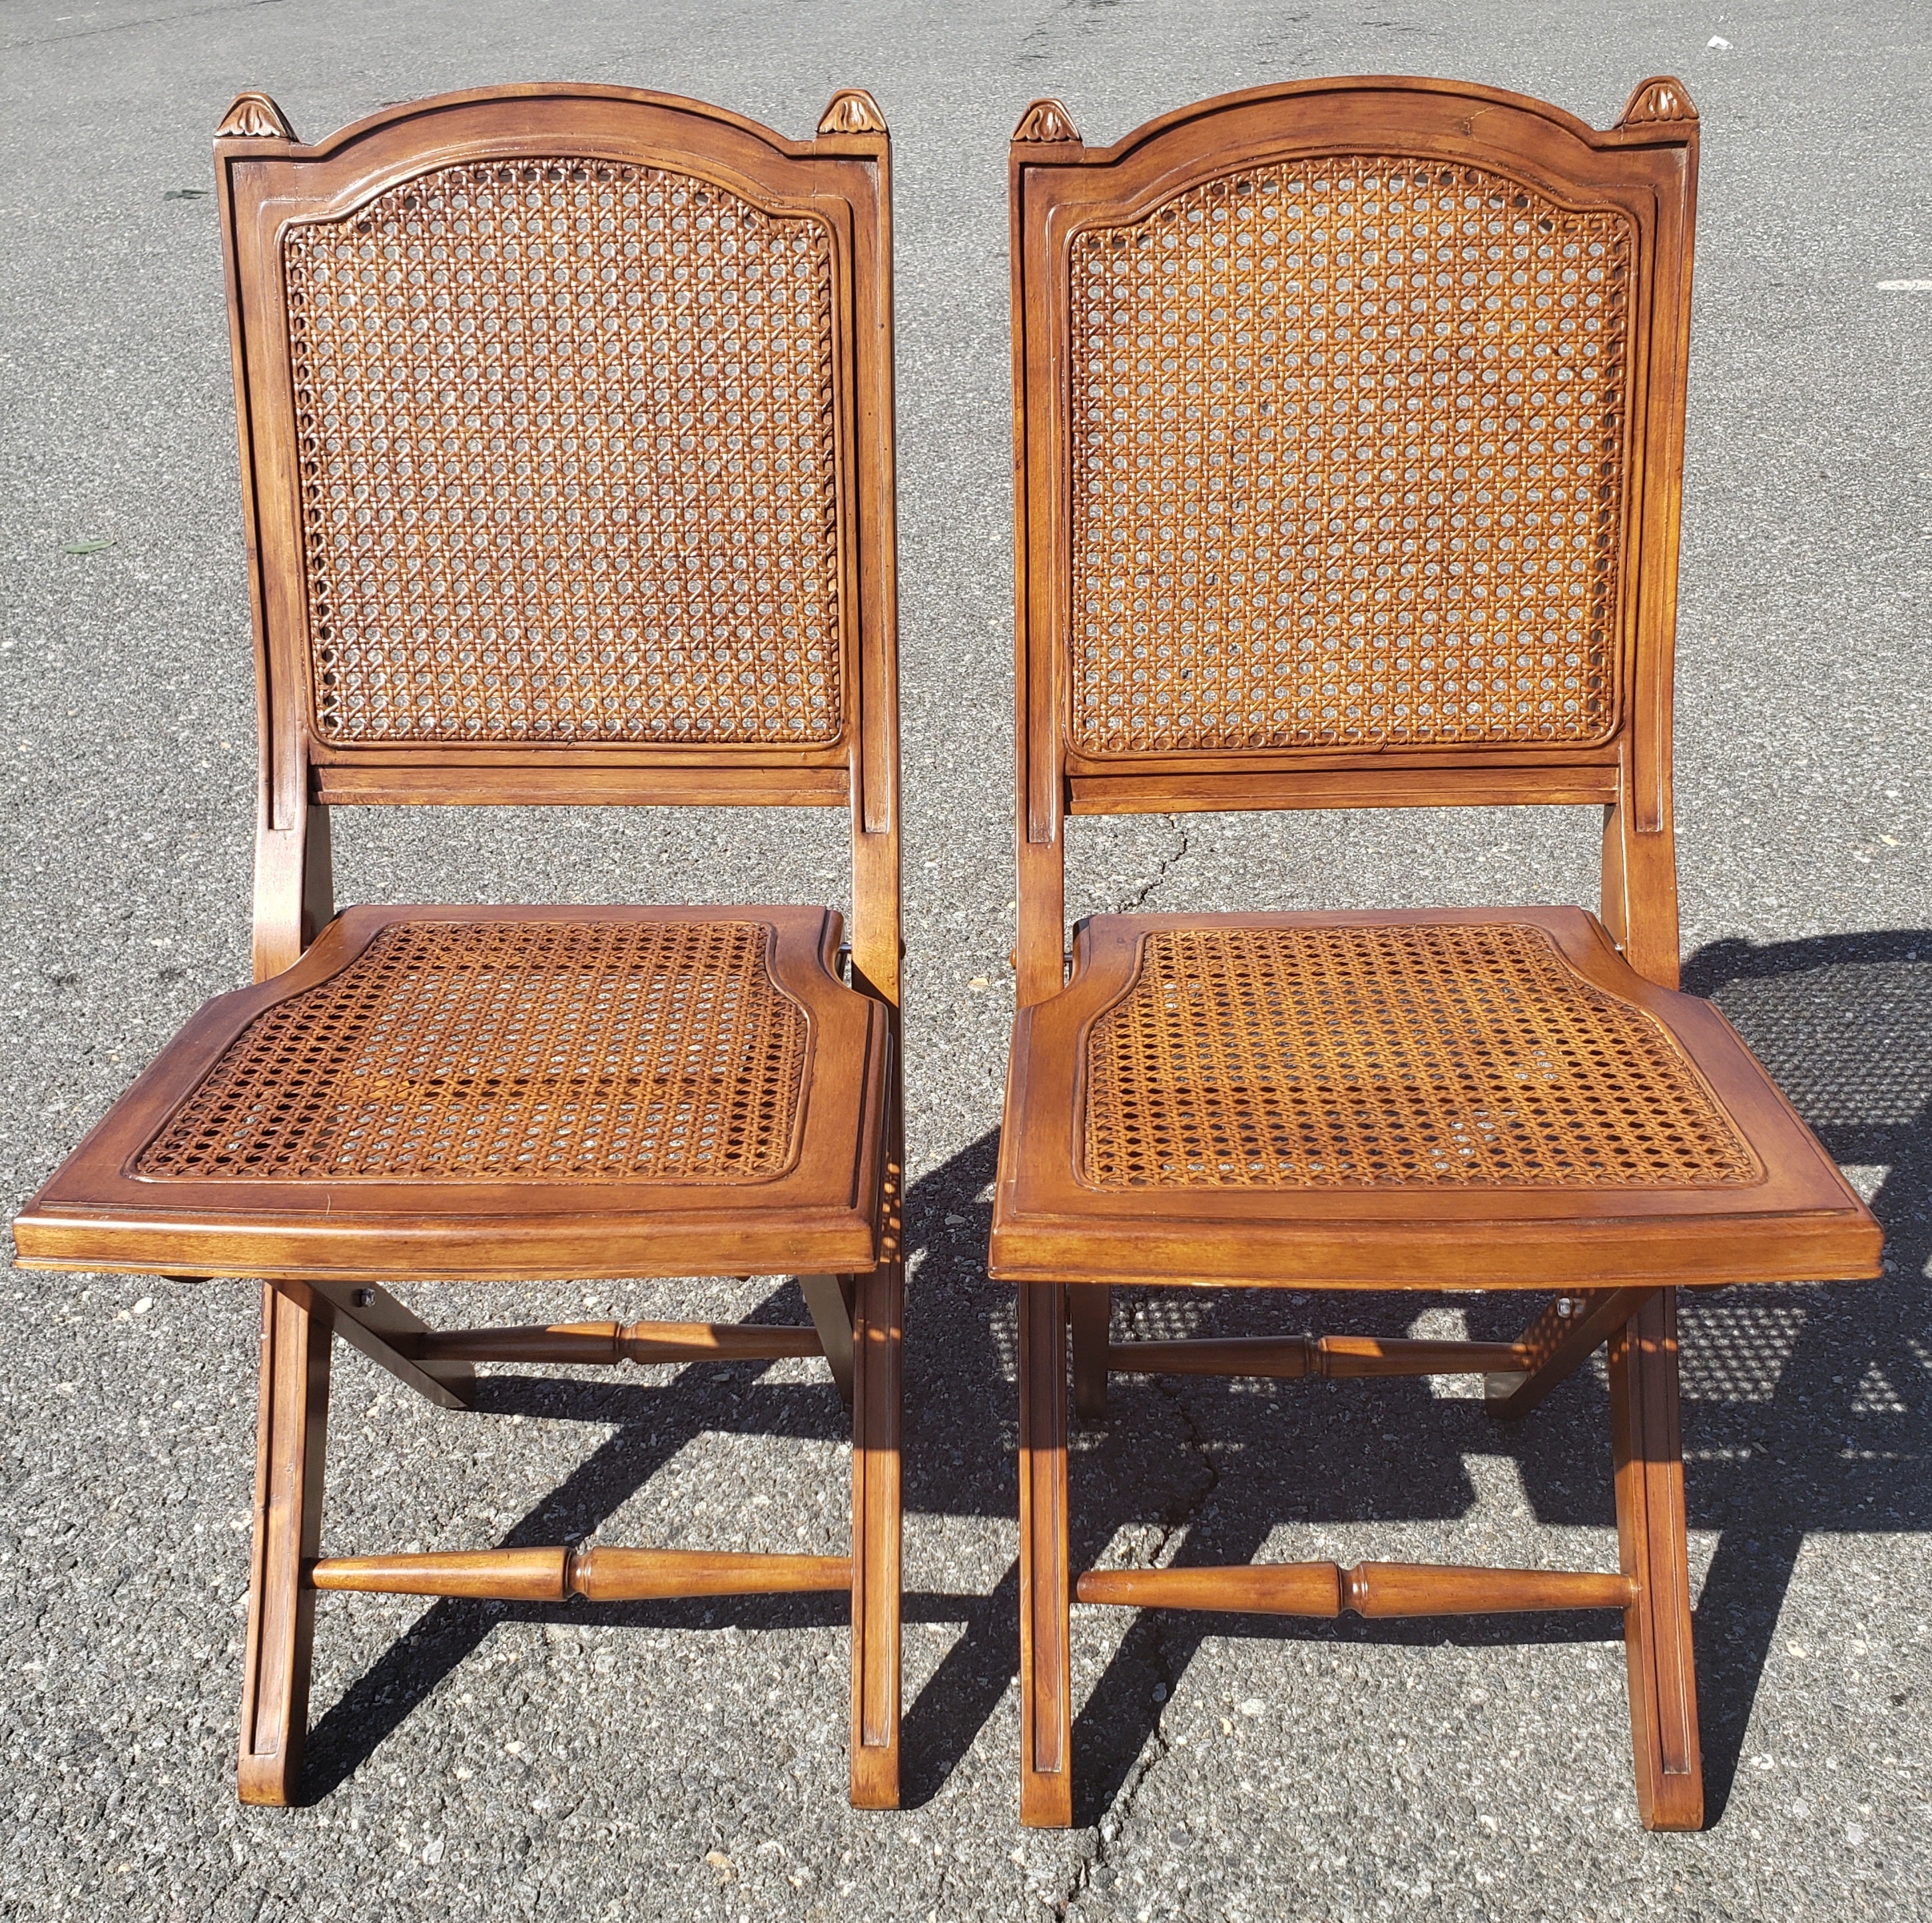 Velvet Solid Cherry and Cane Seat and Back Folding Chairs with Cushions, a Pair For Sale